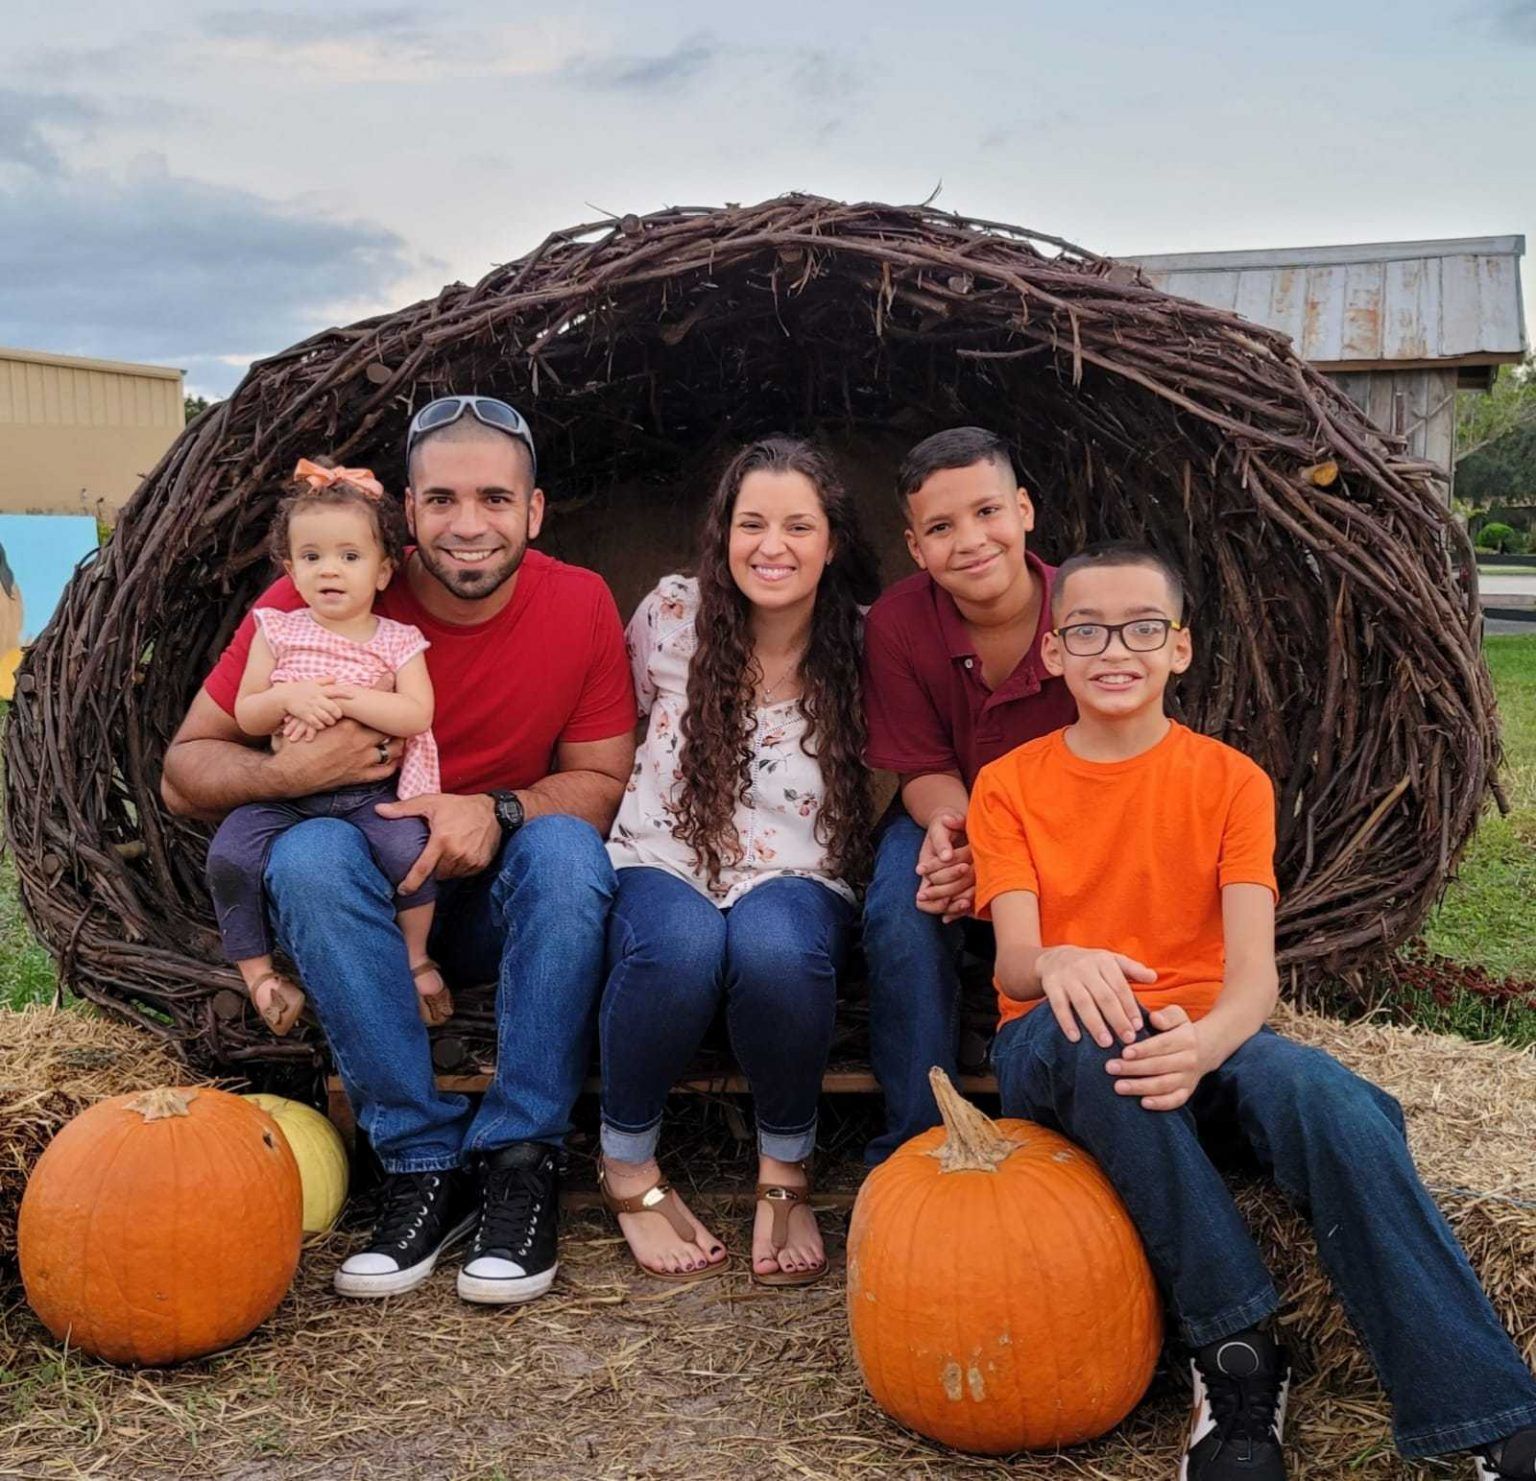 A family is posing for a picture while sitting in a nest surrounded by pumpkins.